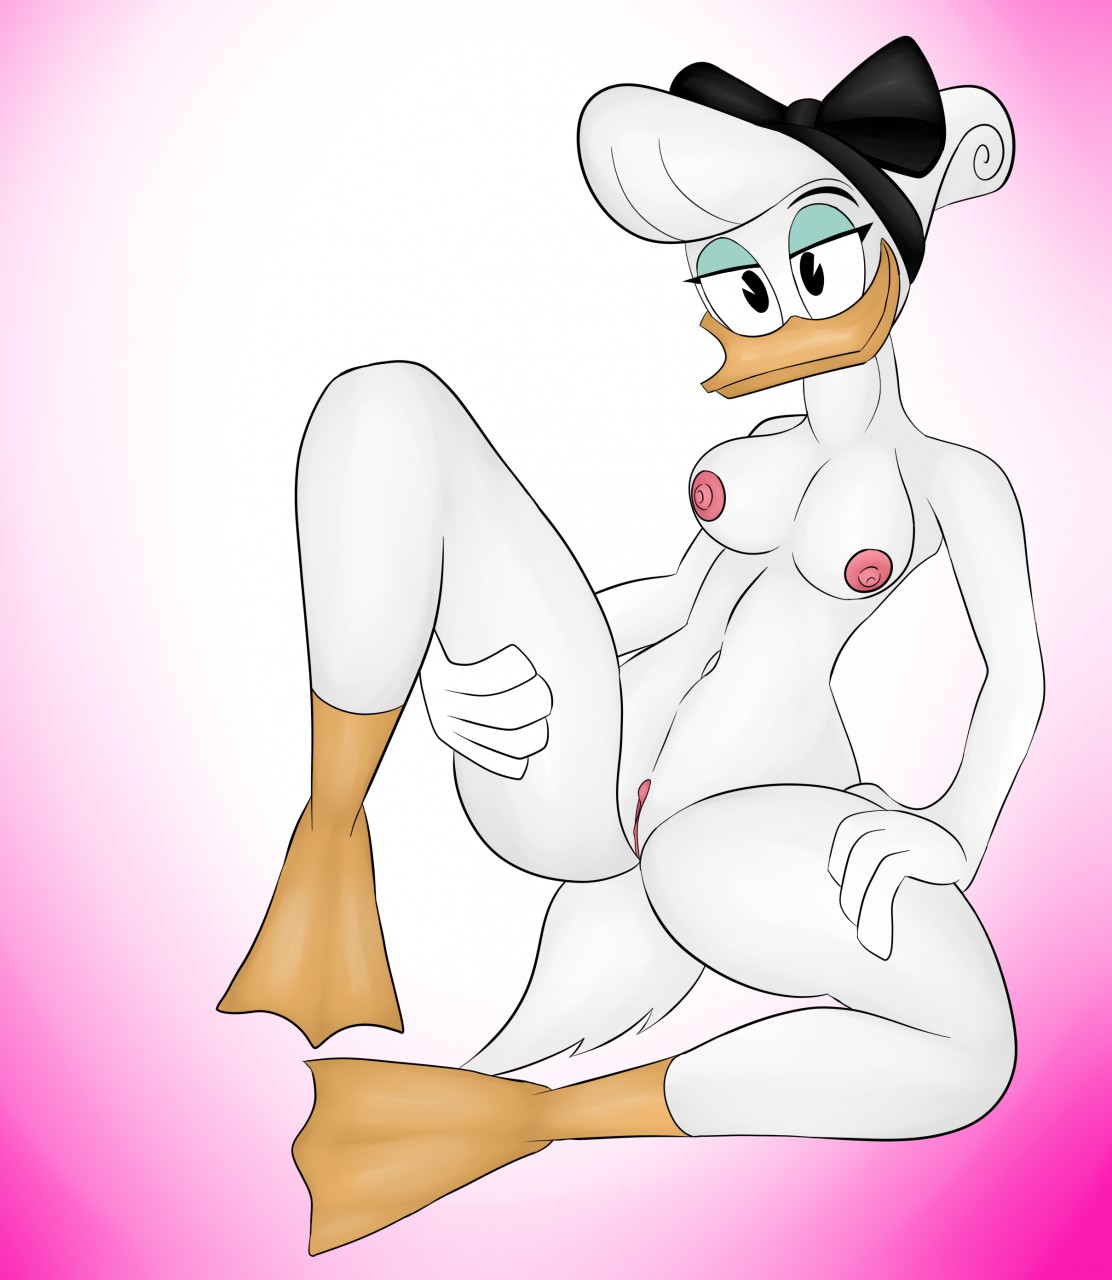 Search Daisy Duck Nude @ images.drownedinsound.com.